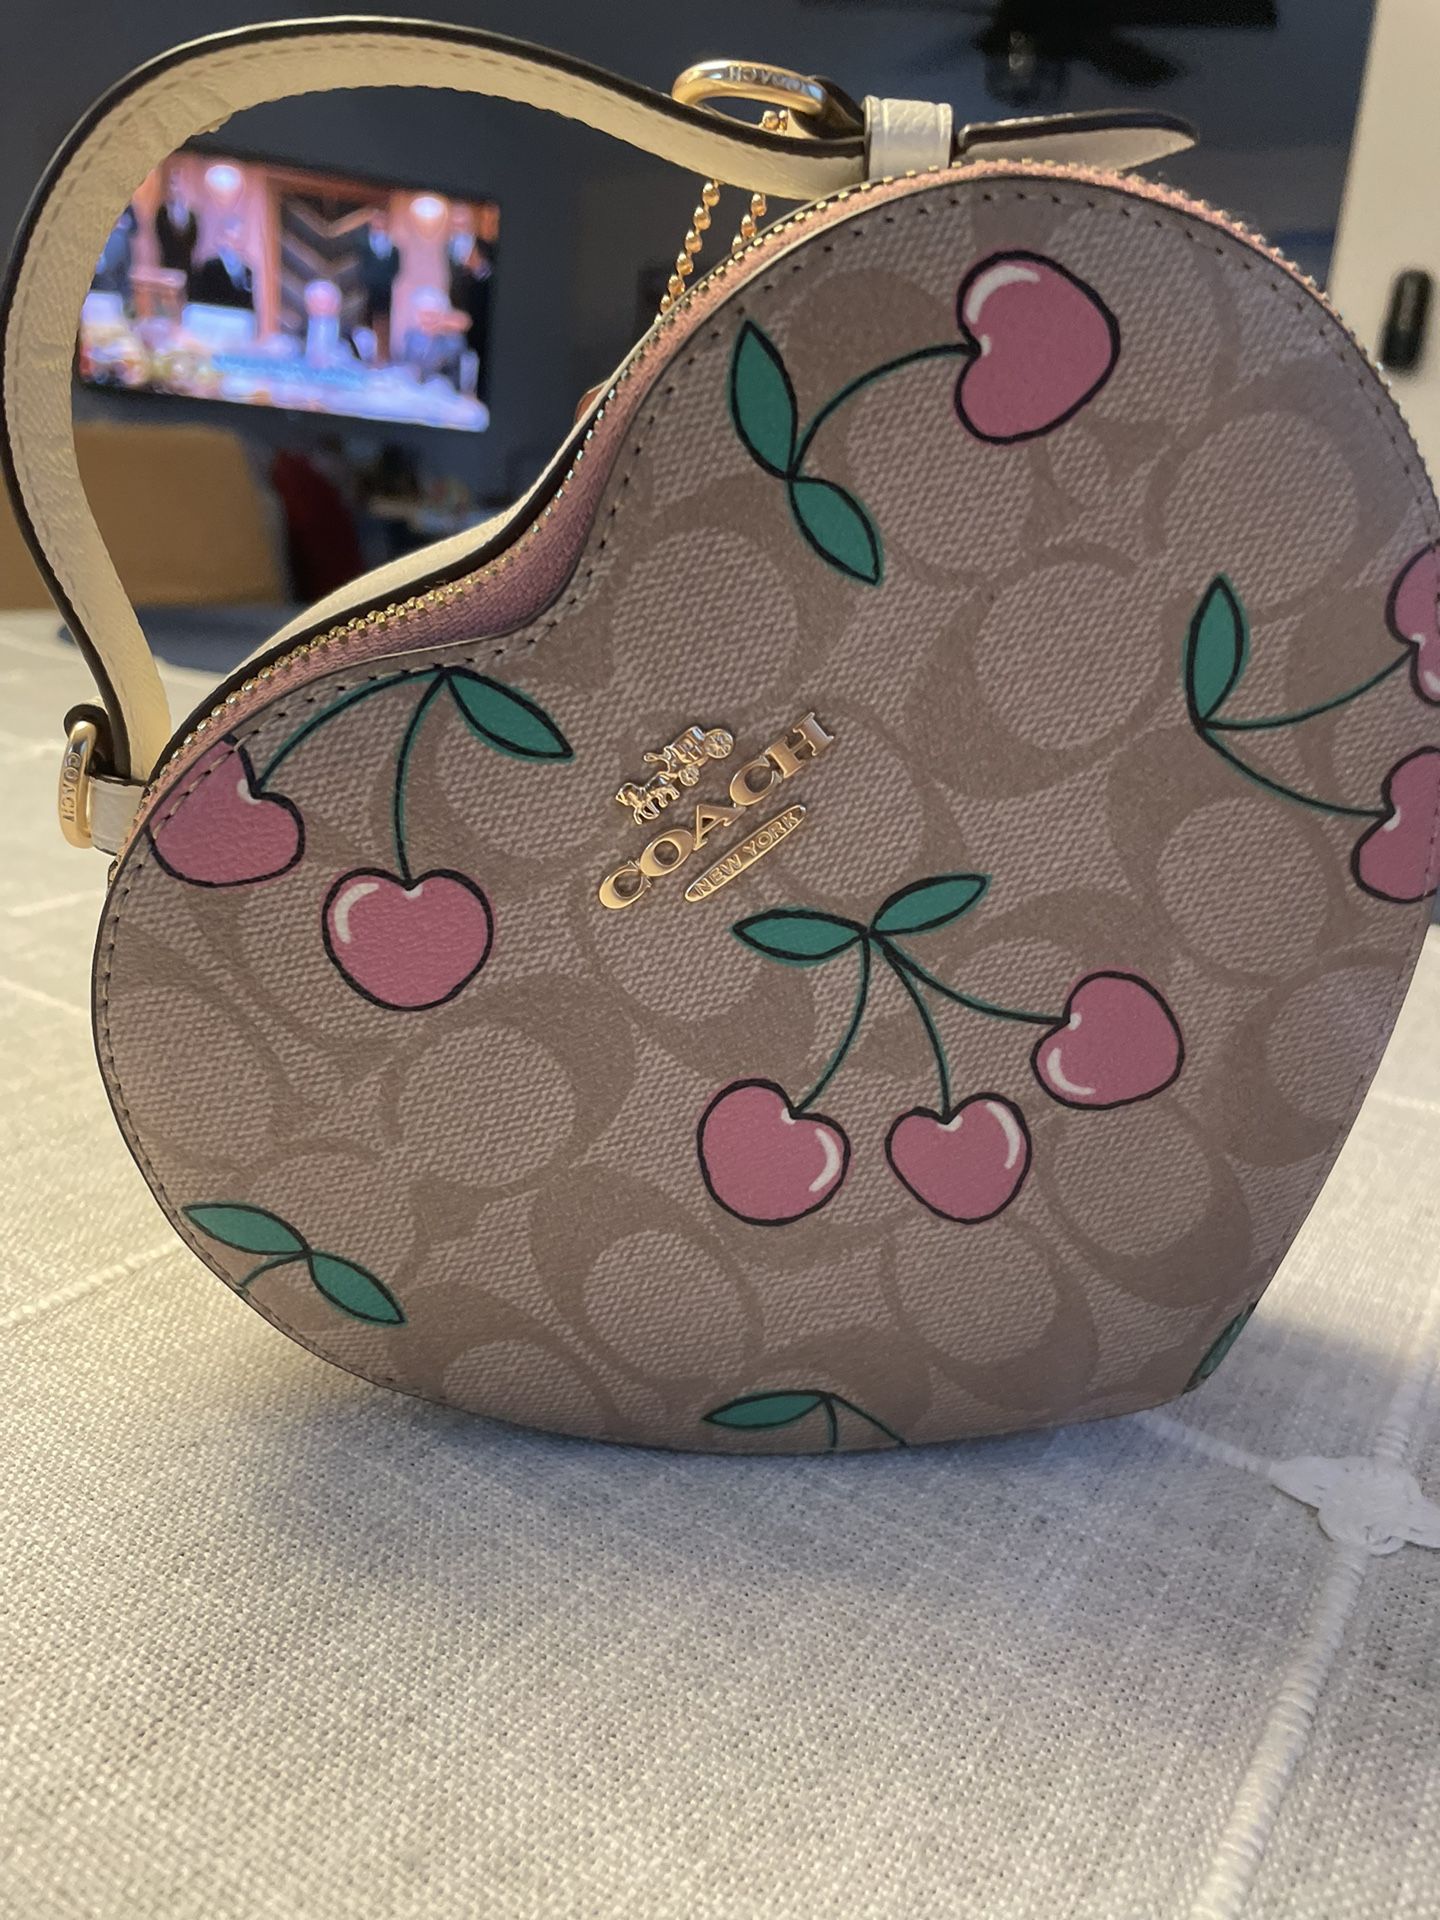 coach tote bag for Sale in San Diego, CA - OfferUp